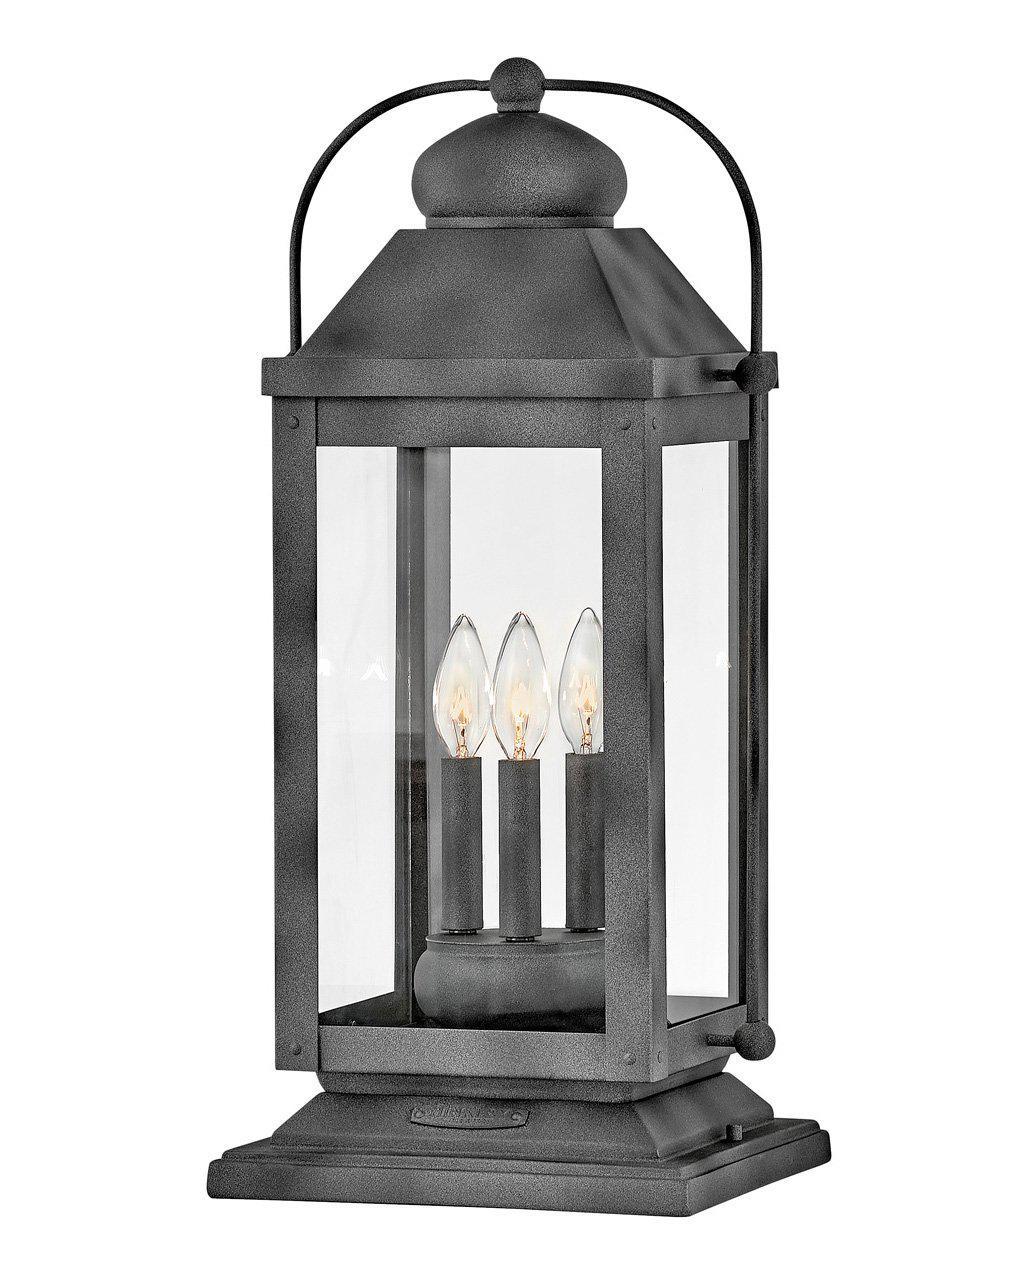 ANCHORAGE-Large Pier Mount Lantern Outdoor l Wall Hinkley Aged Zinc  